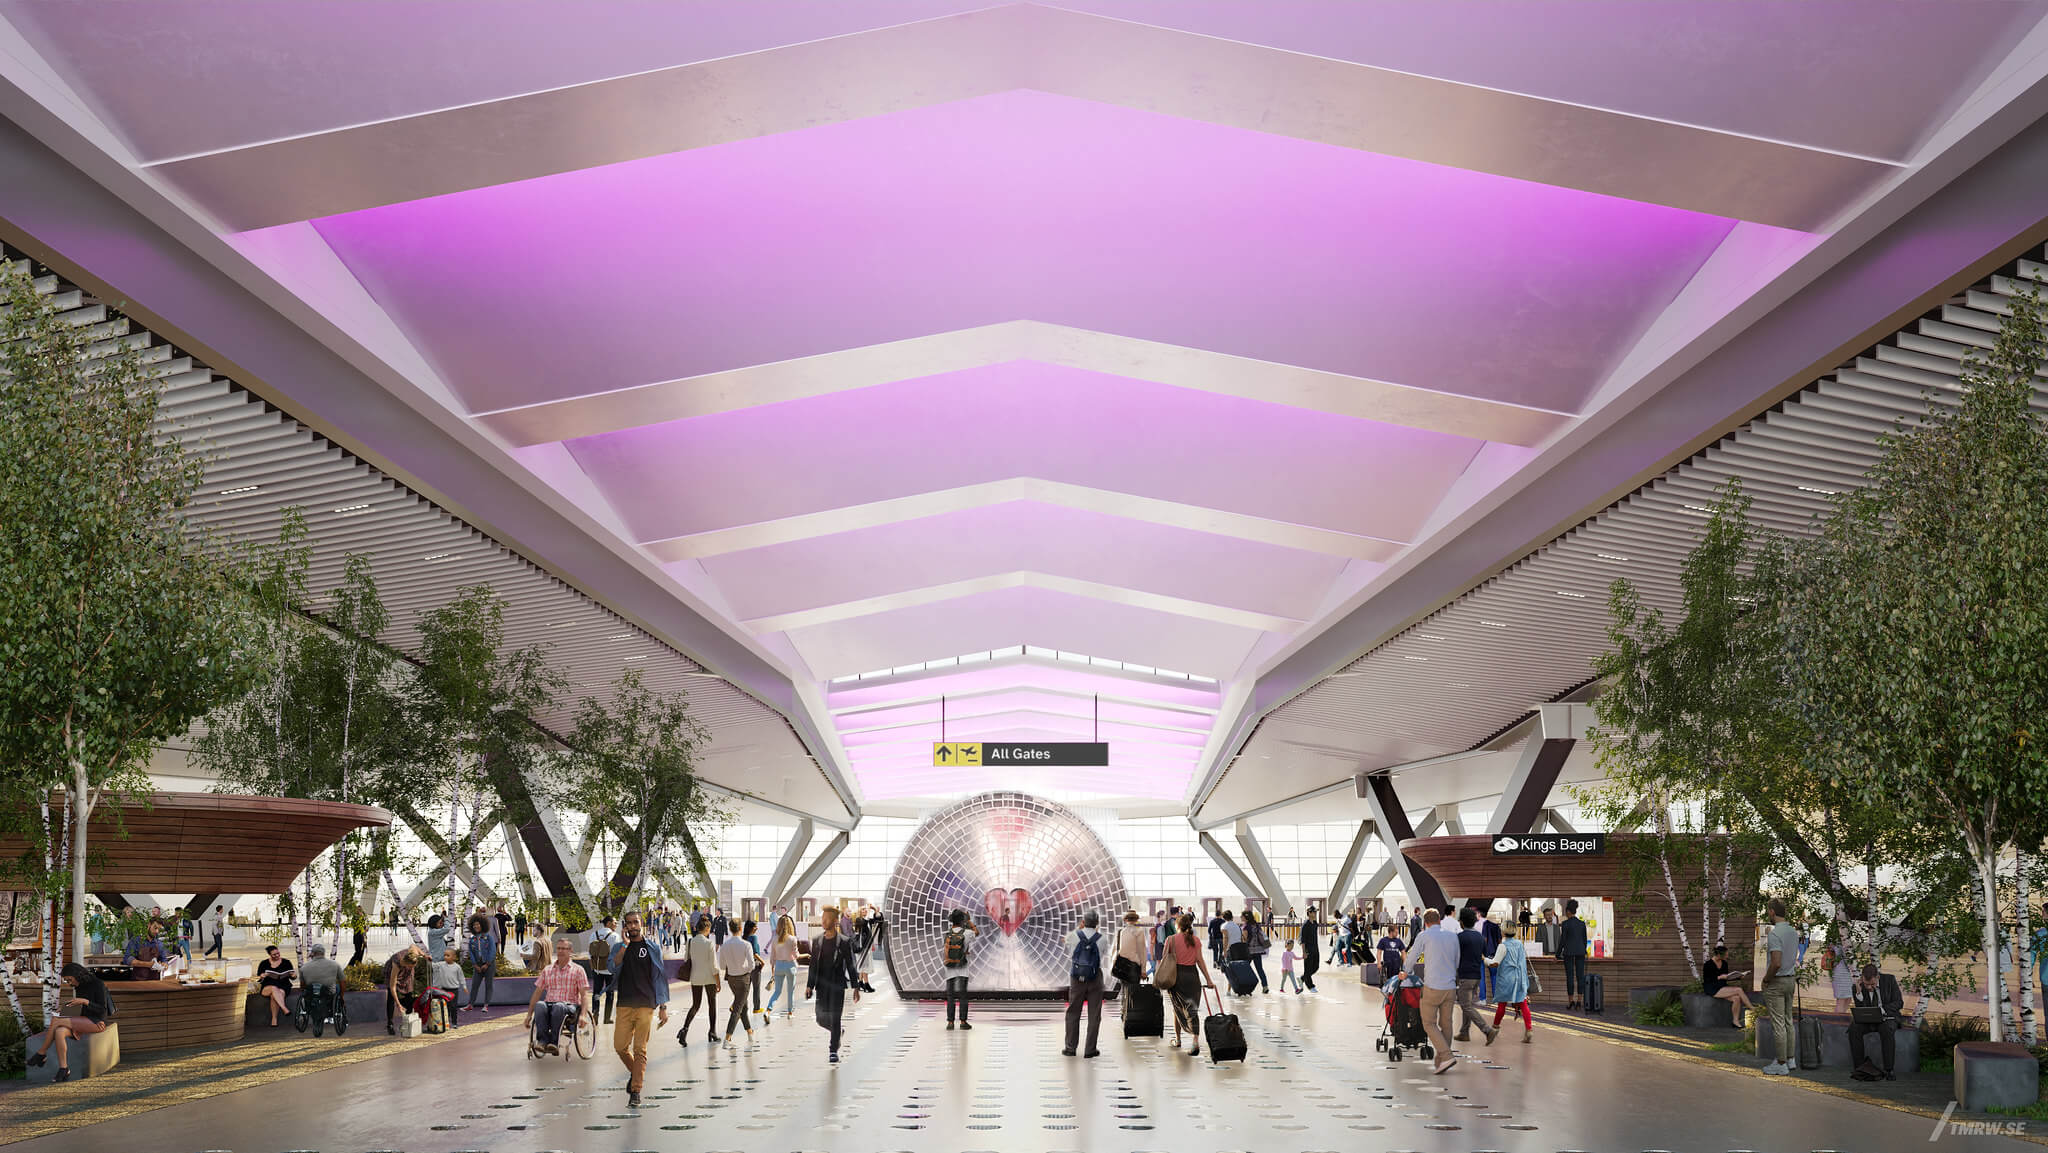 rendering of an airport departures hall at jfk international airport with a big mirrored ball